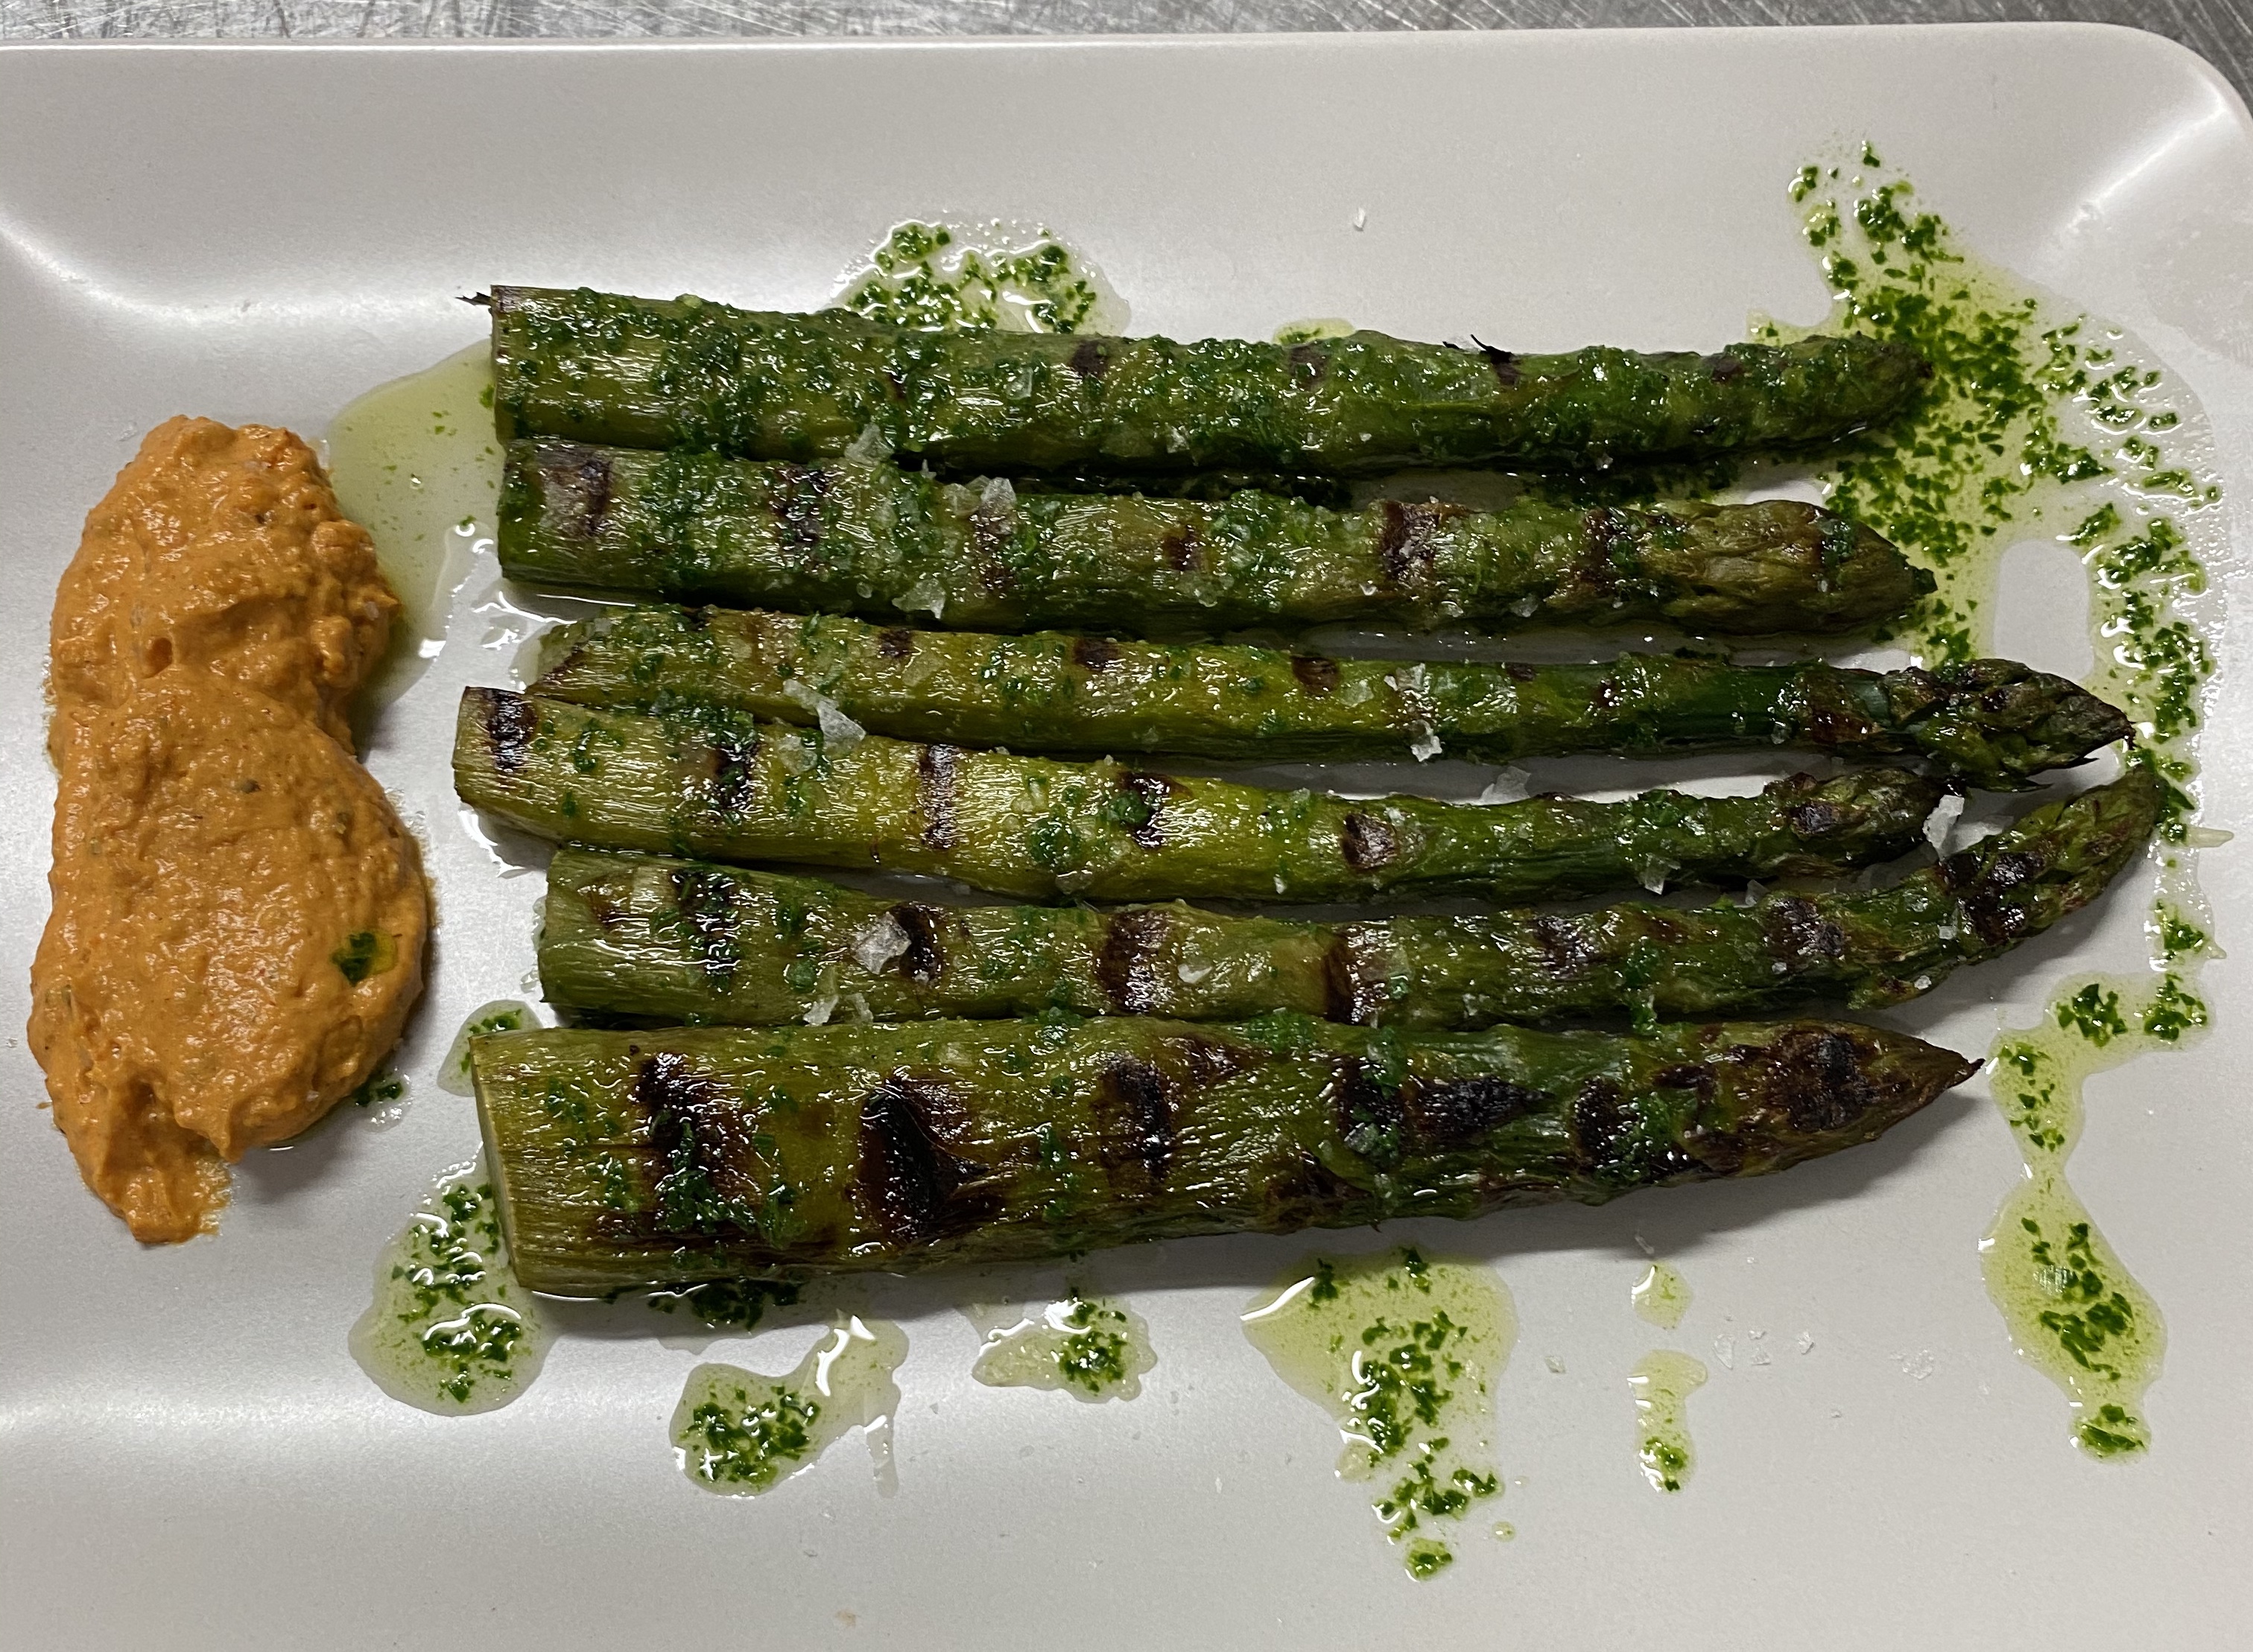 GREEN ASPARAGUS GRILLED WITH ROMESCO